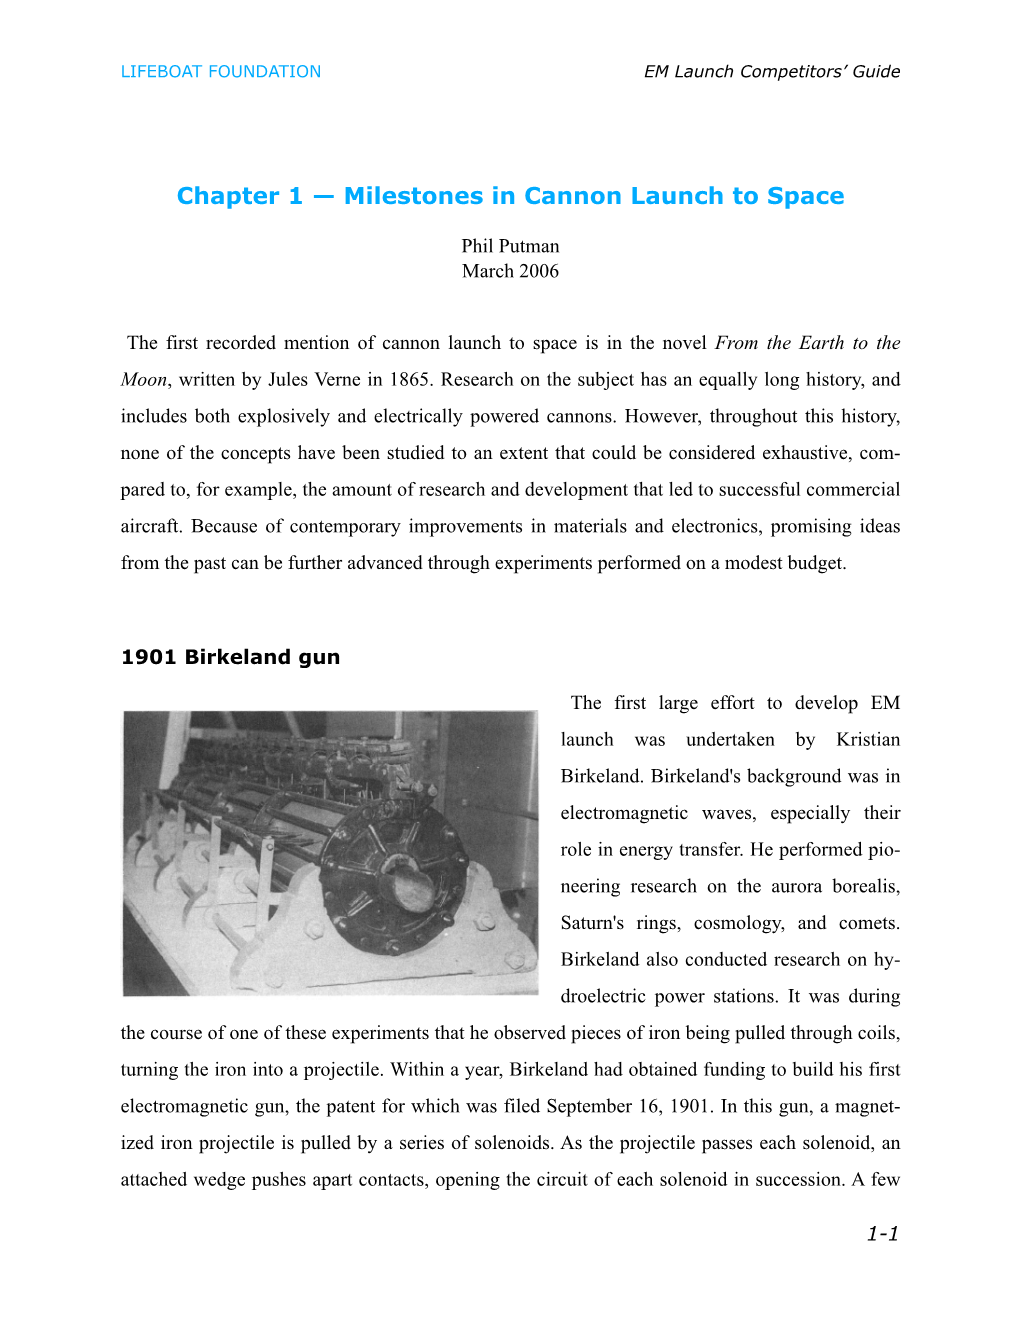 Milestones in Cannon Launch to Space